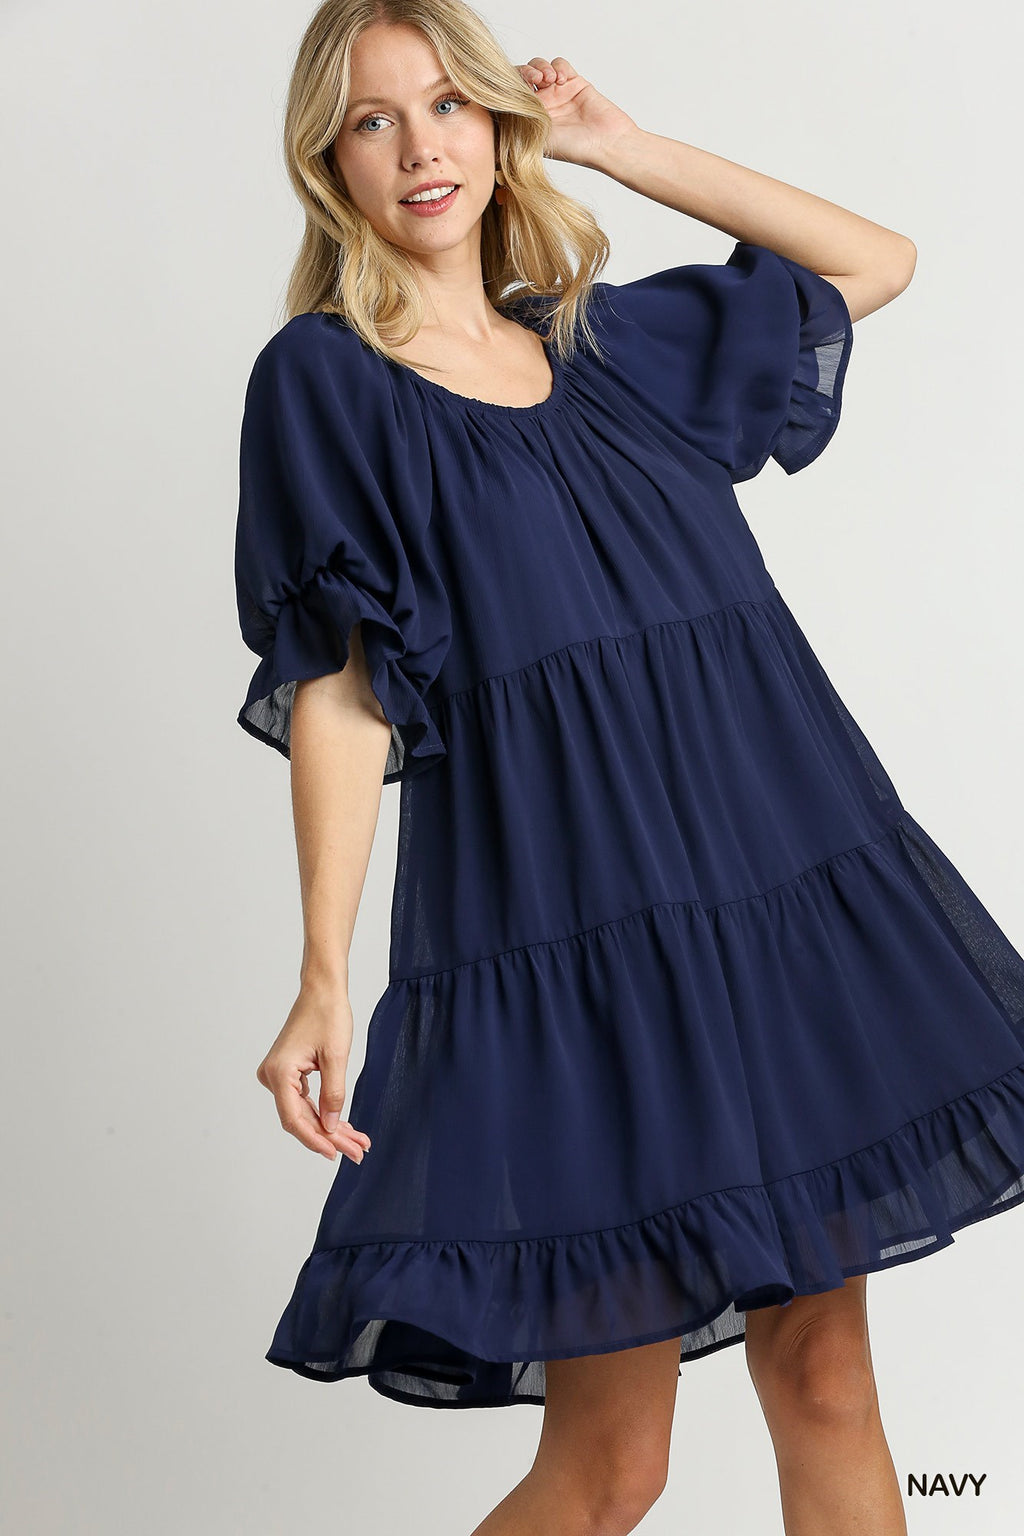 "Shelby" Puff Sleeve Dress, 2 colors